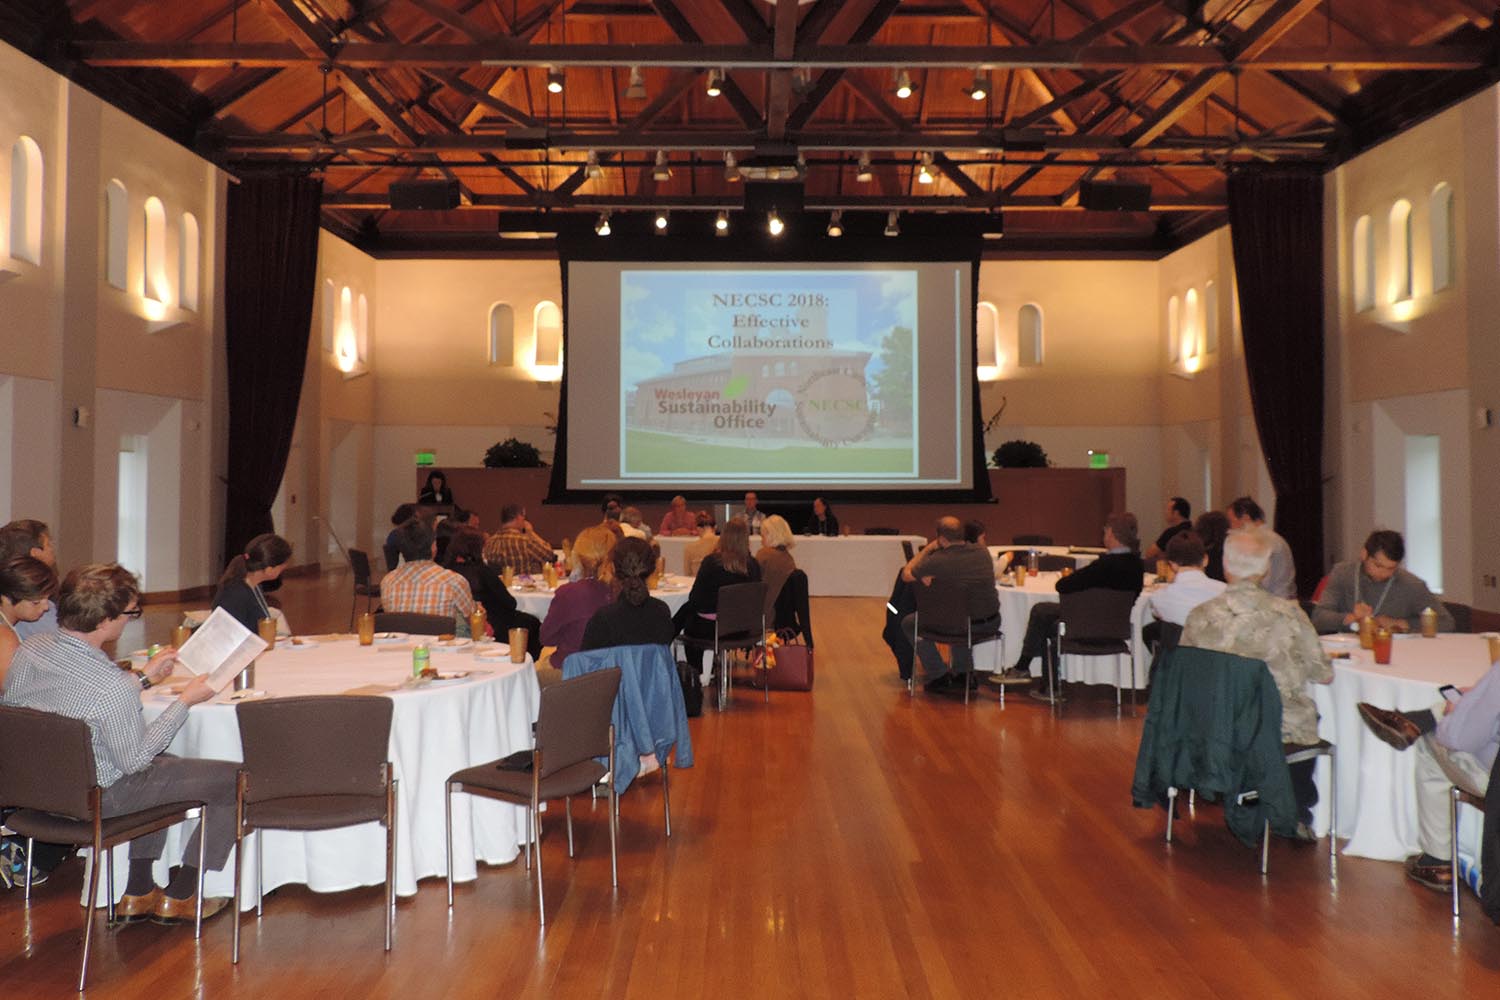 Three Wesleyan employees participated in the Northeast Campus Sustainability Consortium’s Annual Meeting June 4-5. The meeting focused on effective collaborations within campus, between campuses, and between campus and community.